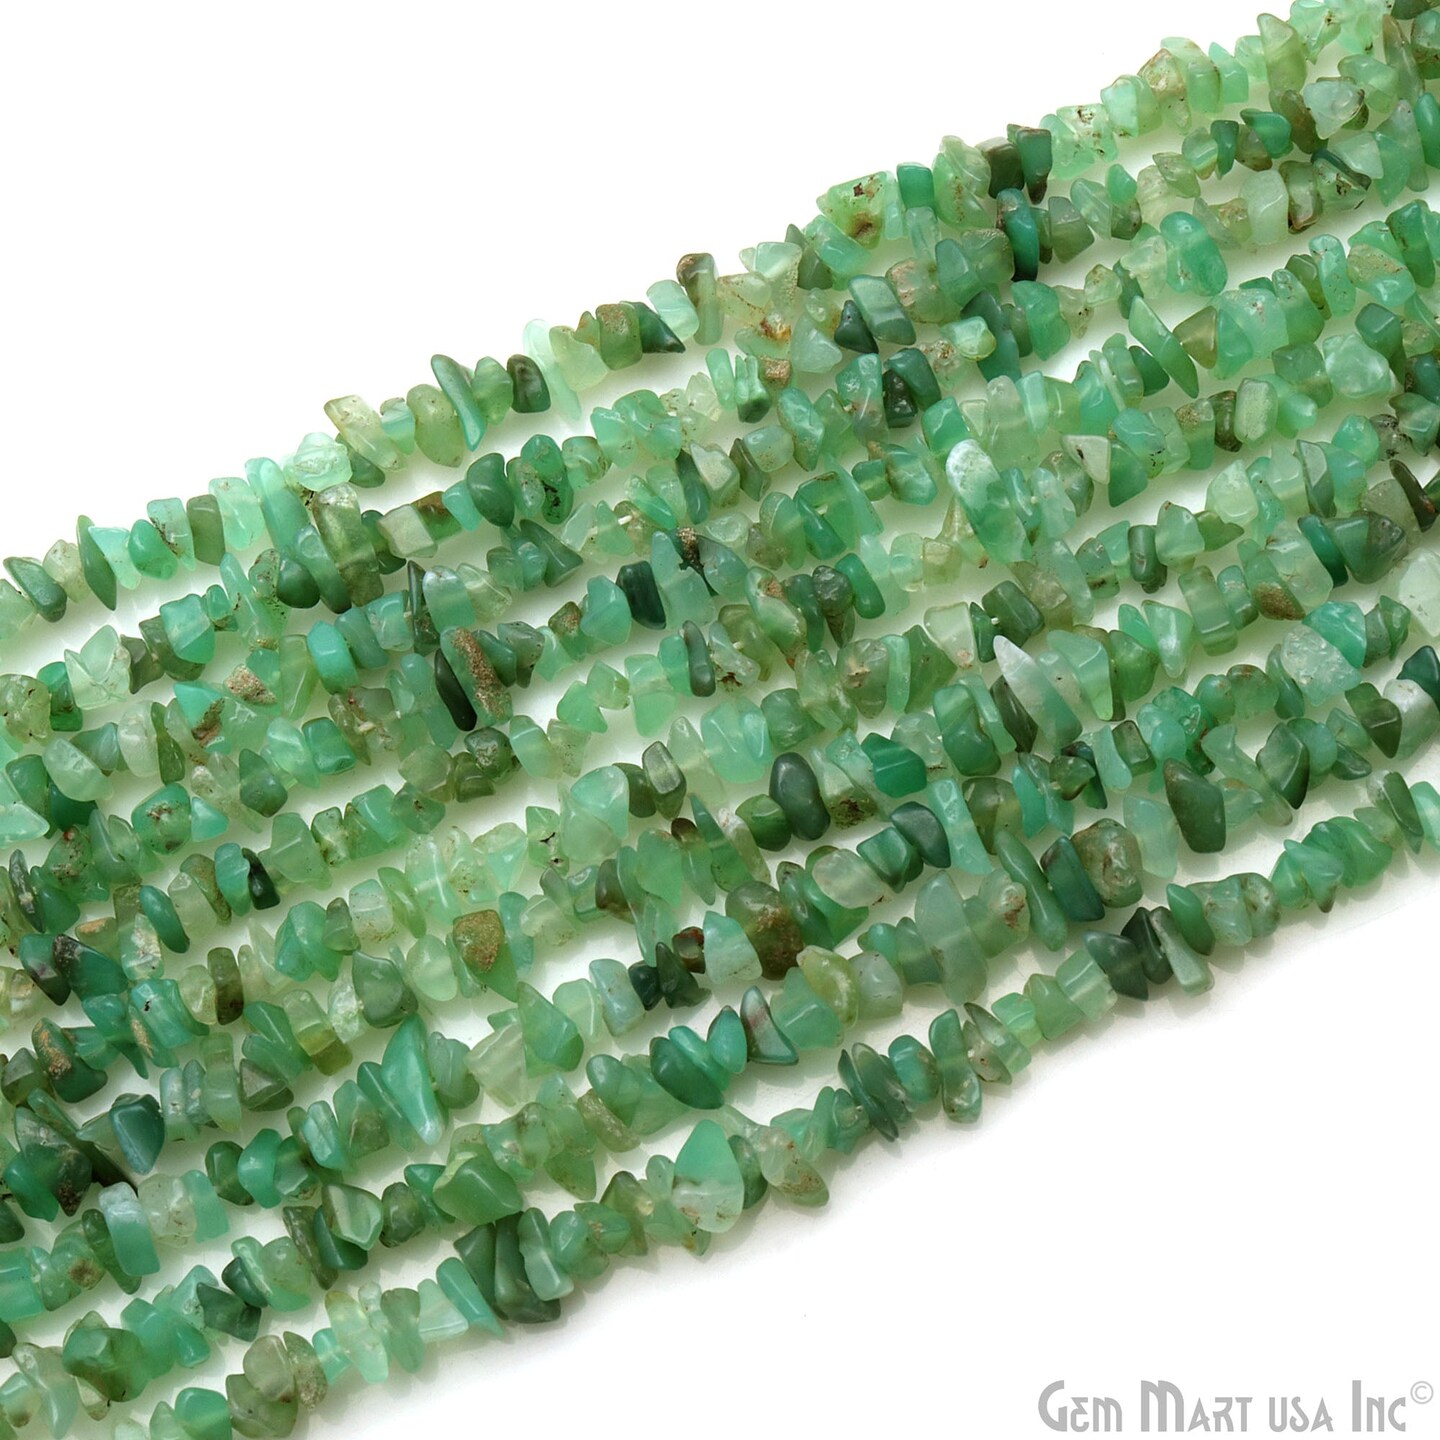 Chrysoprase Chip Beads, 34 Inch, Natural Chip Strands, Drilled Strung Nugget Beads, 3-7mm, Polished, GemMartUSA (CHCP-70001)